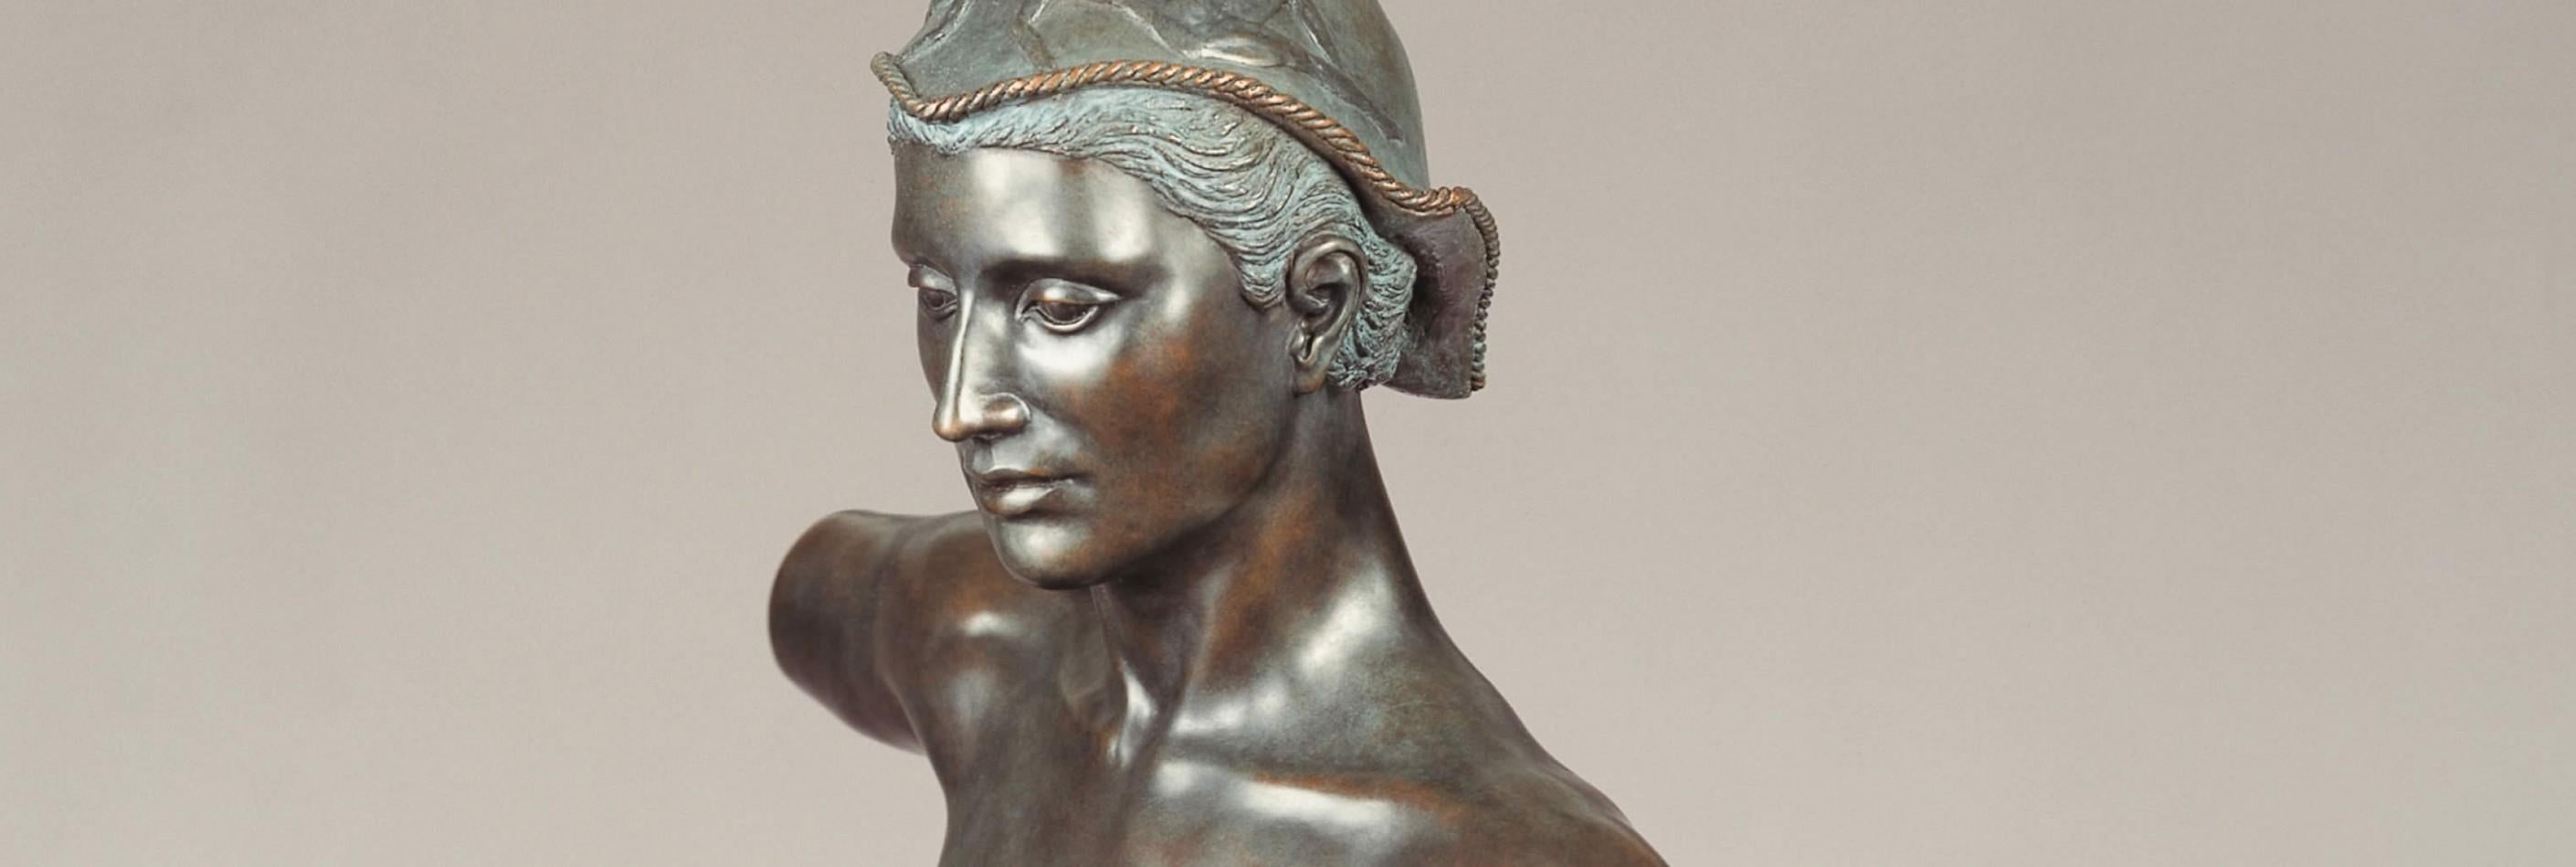 Was Bleibet Aber Stiften die Dichter Bronze Sculpture Classic Contemporary Poem

The sculptures of Margot Homan (1956, Oss, the Netherlands) show a perfect command of the old craft of modelling and sculpting, with which she continually develops an